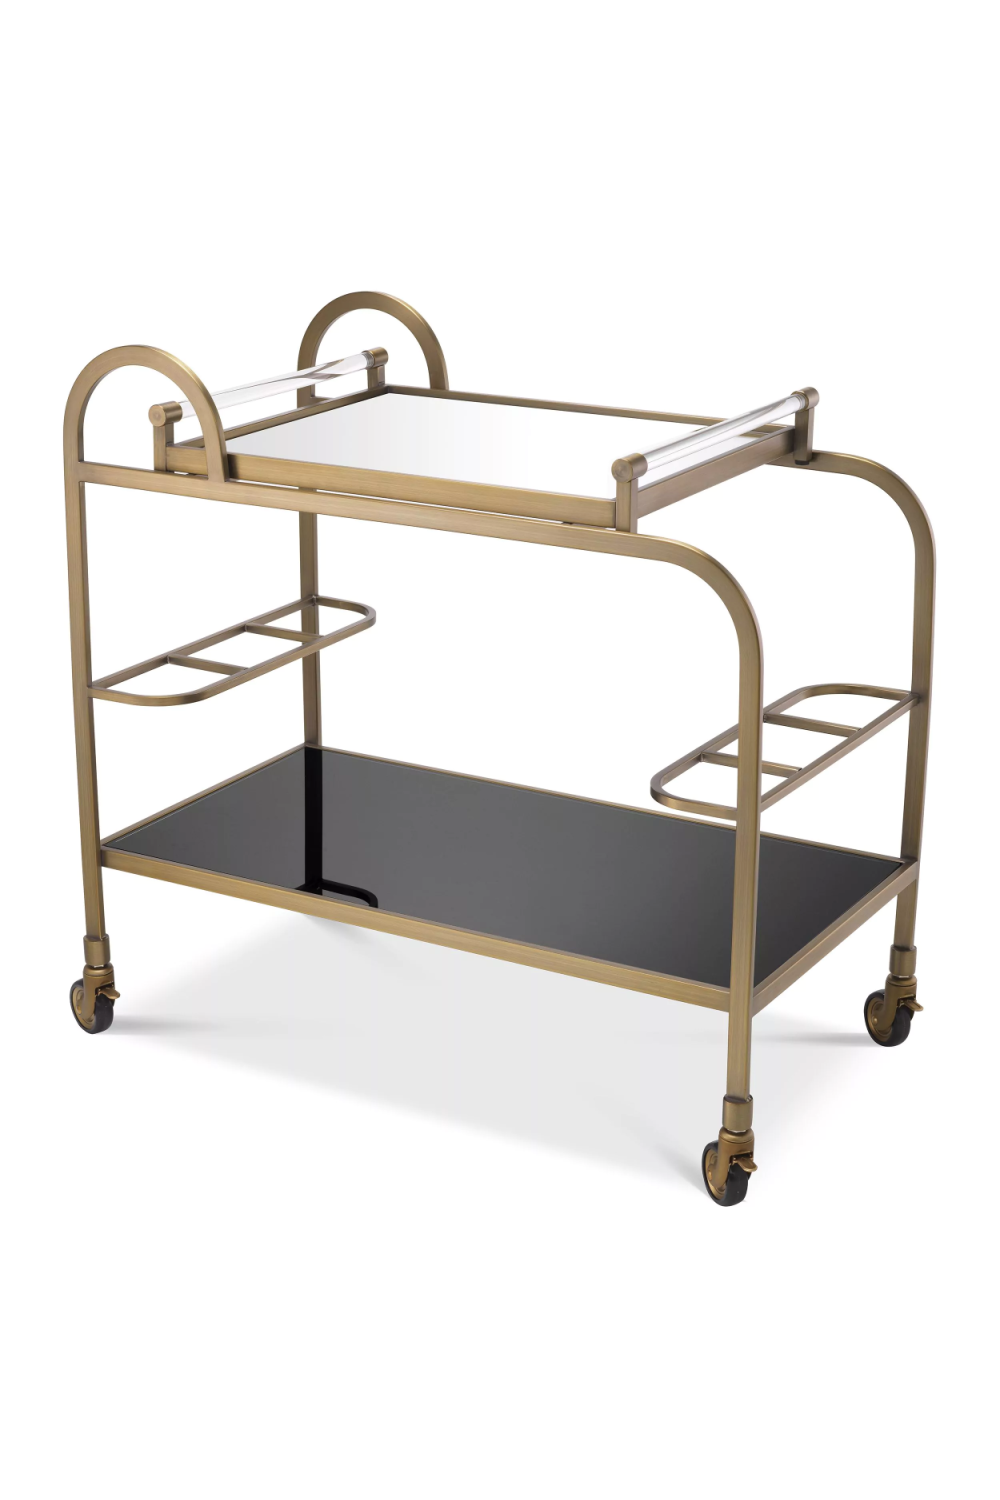 Modern Brushed Brass Trolley | Eichholtz Montreuil | OROA.com